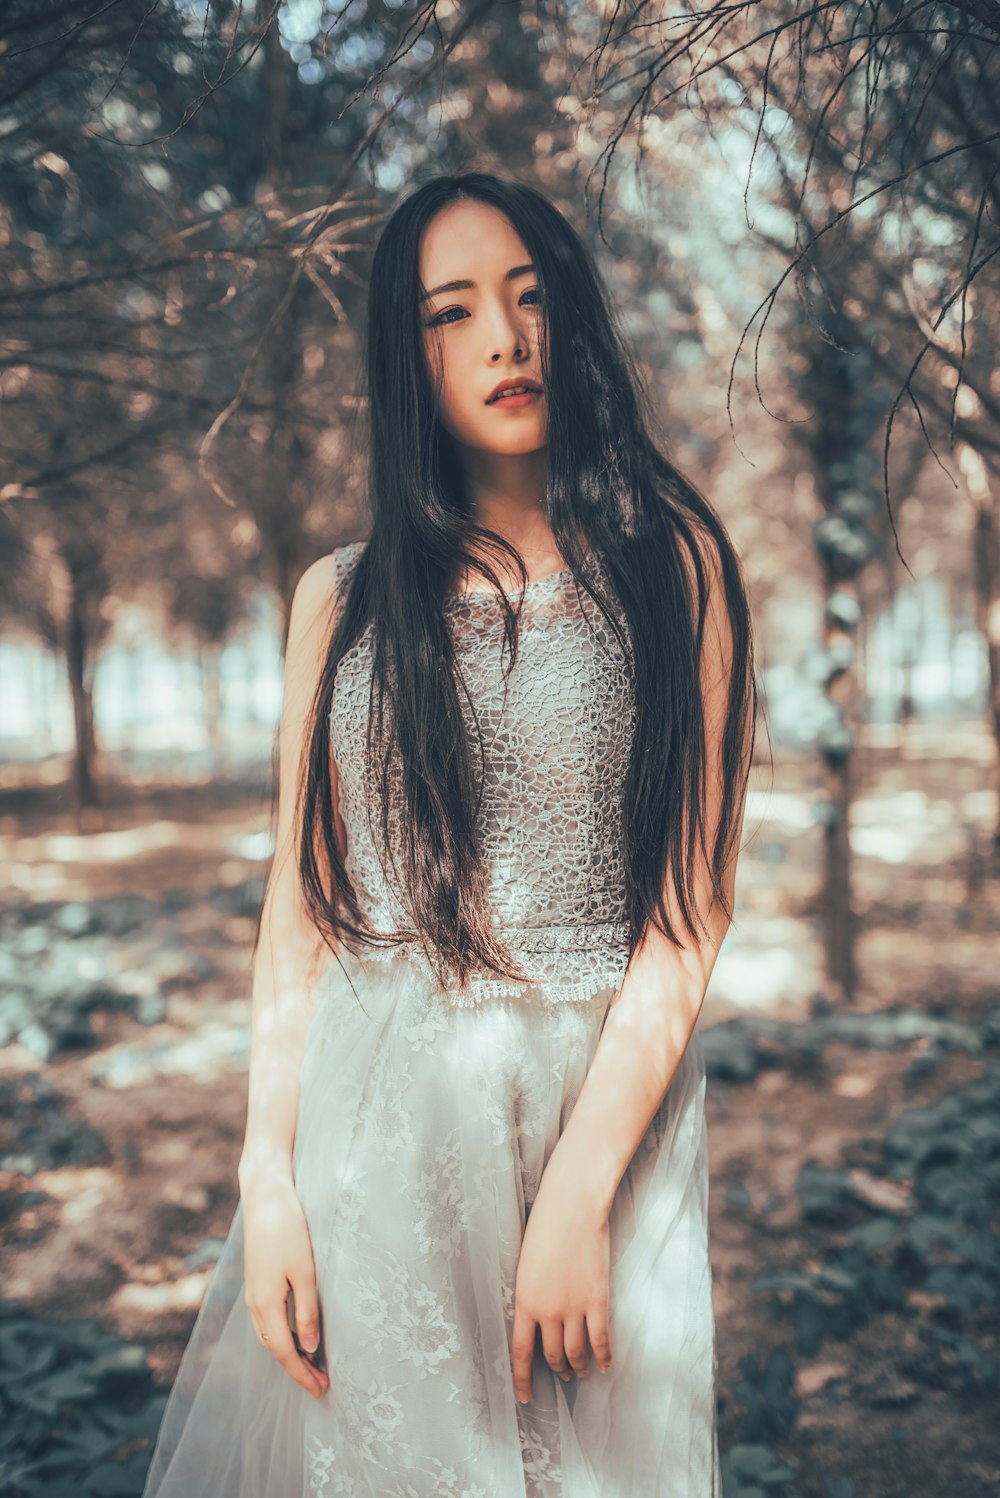 woman in white dress standing near bare trees during daytime